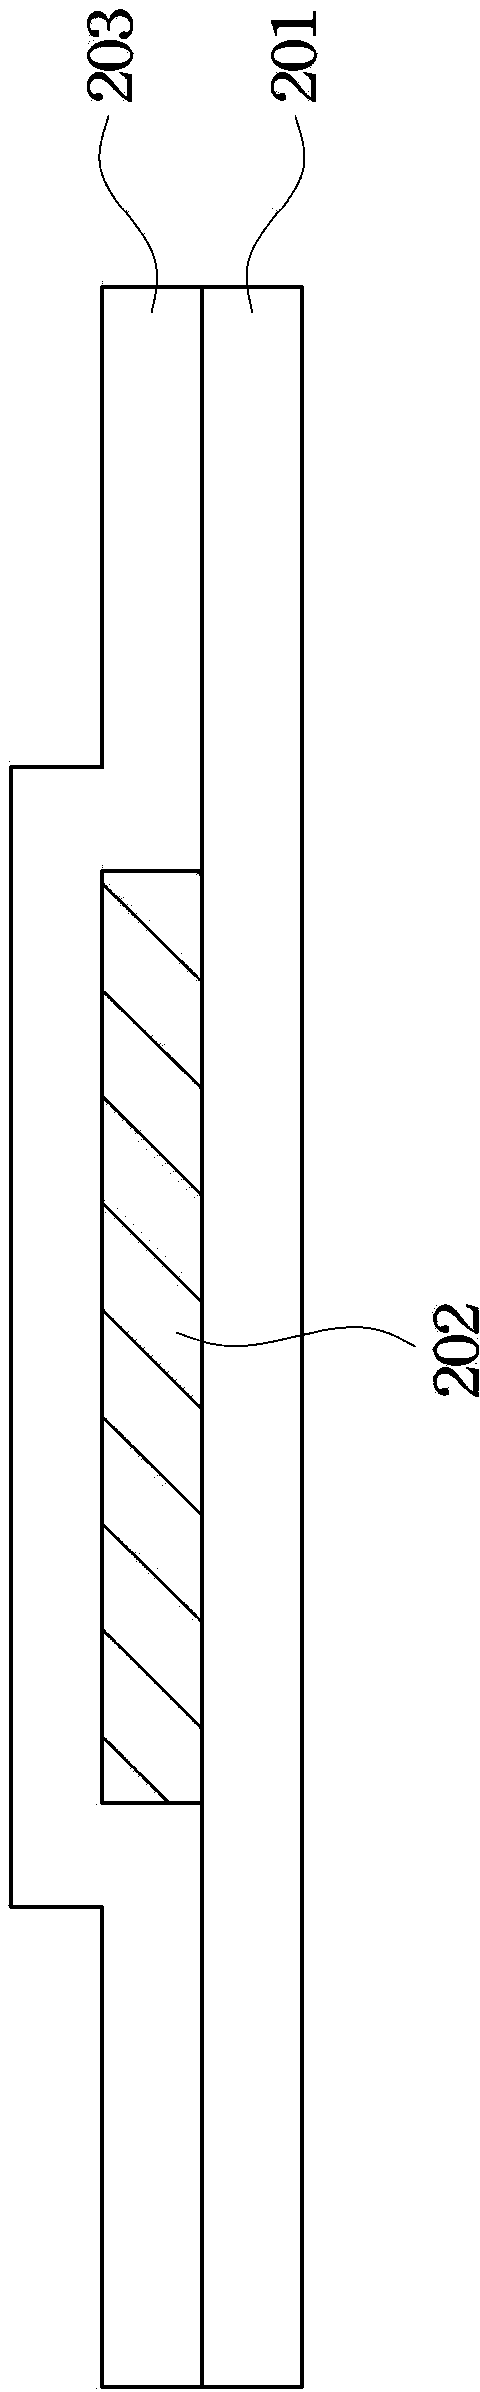 Oxide thin film transistor structure and method for producing same